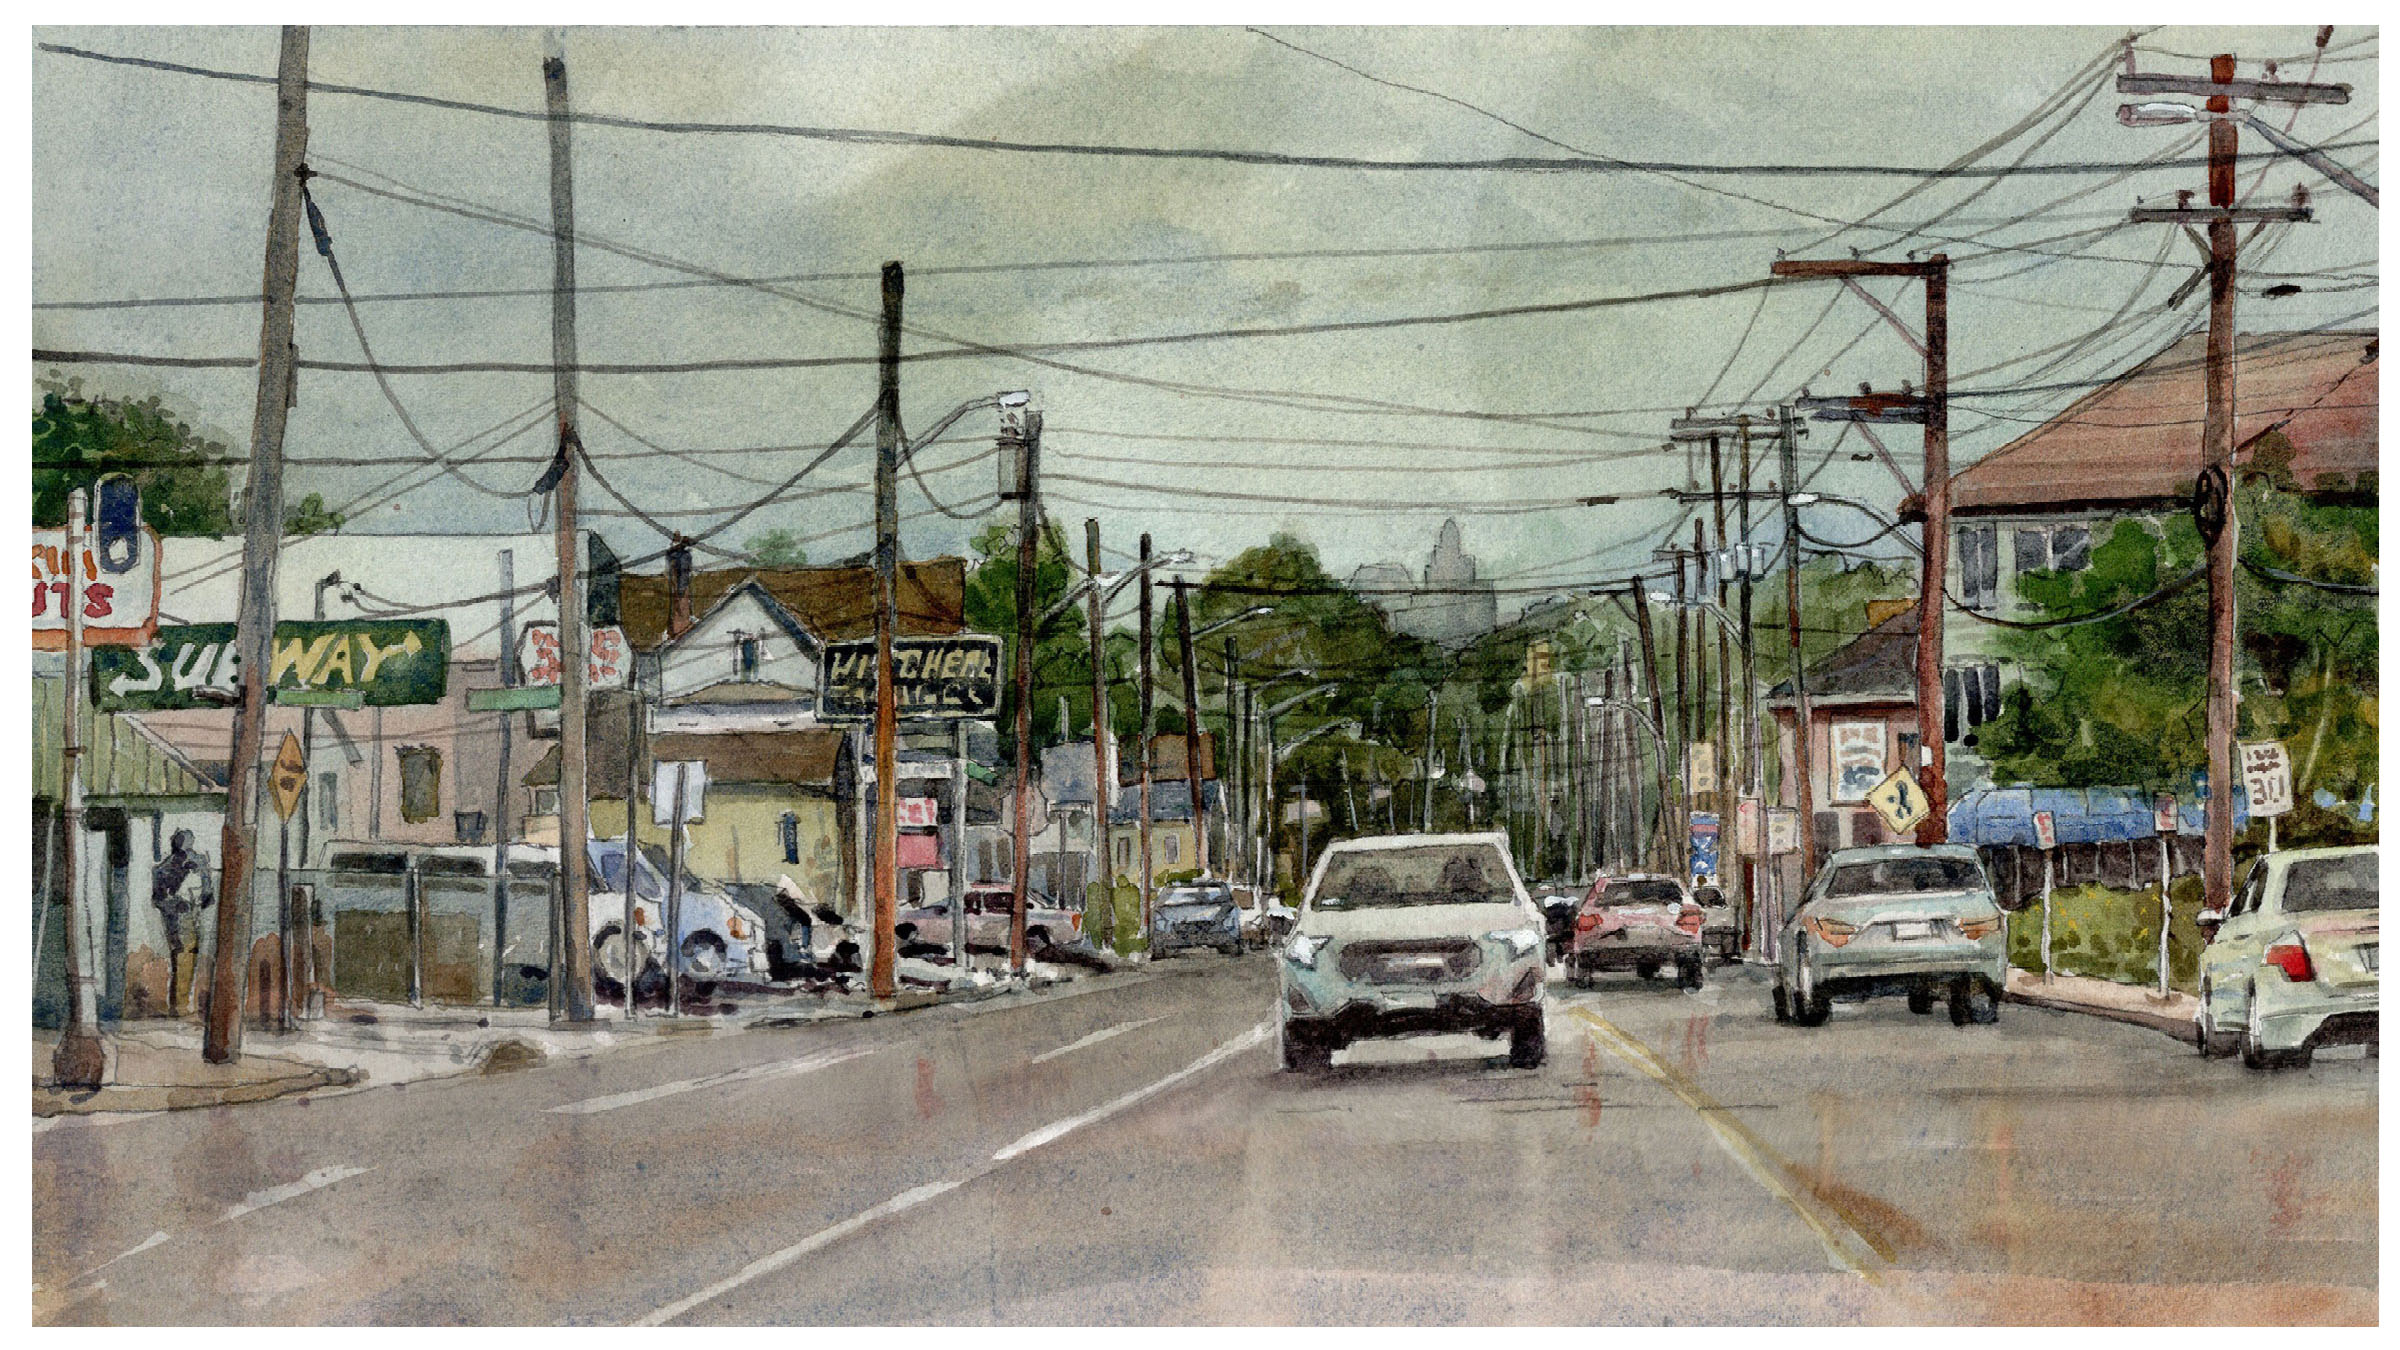 Ed Huff, "Intersections", Portsmouth Arts Guild